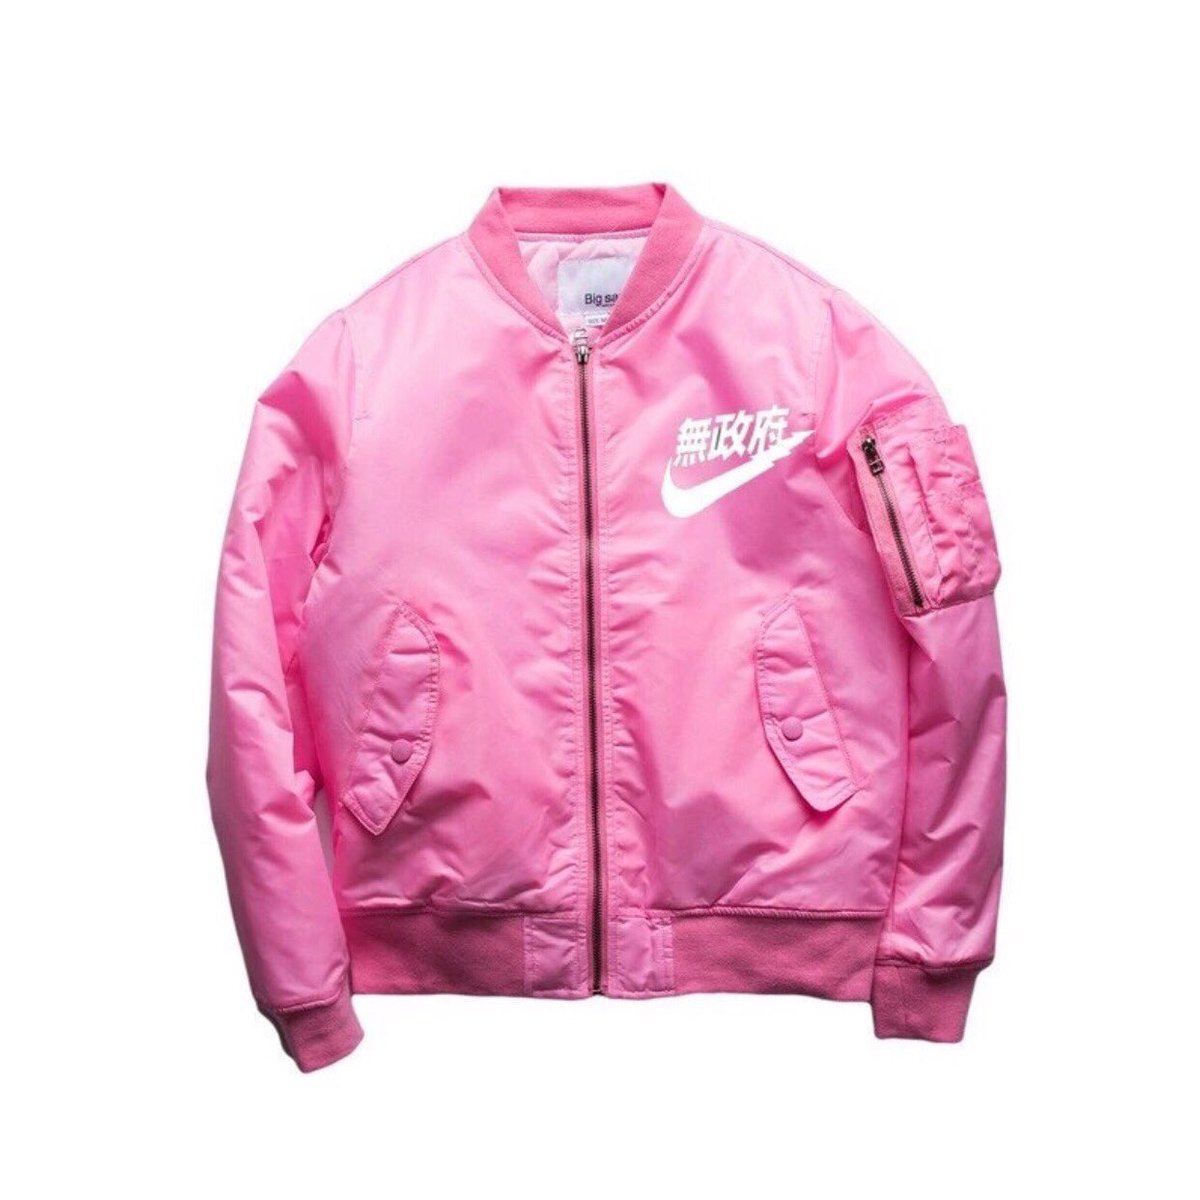 Juntar compuesto regular Vash The Stampede on Twitter: "💞THIS PINK BOMBER JACKET IS LIT💞 use promo  code "PREE" for 10% off... https://t.co/4US720nxmz by #Melaninful via  @c0nvey https://t.co/TzCiUfbHV5" / Twitter